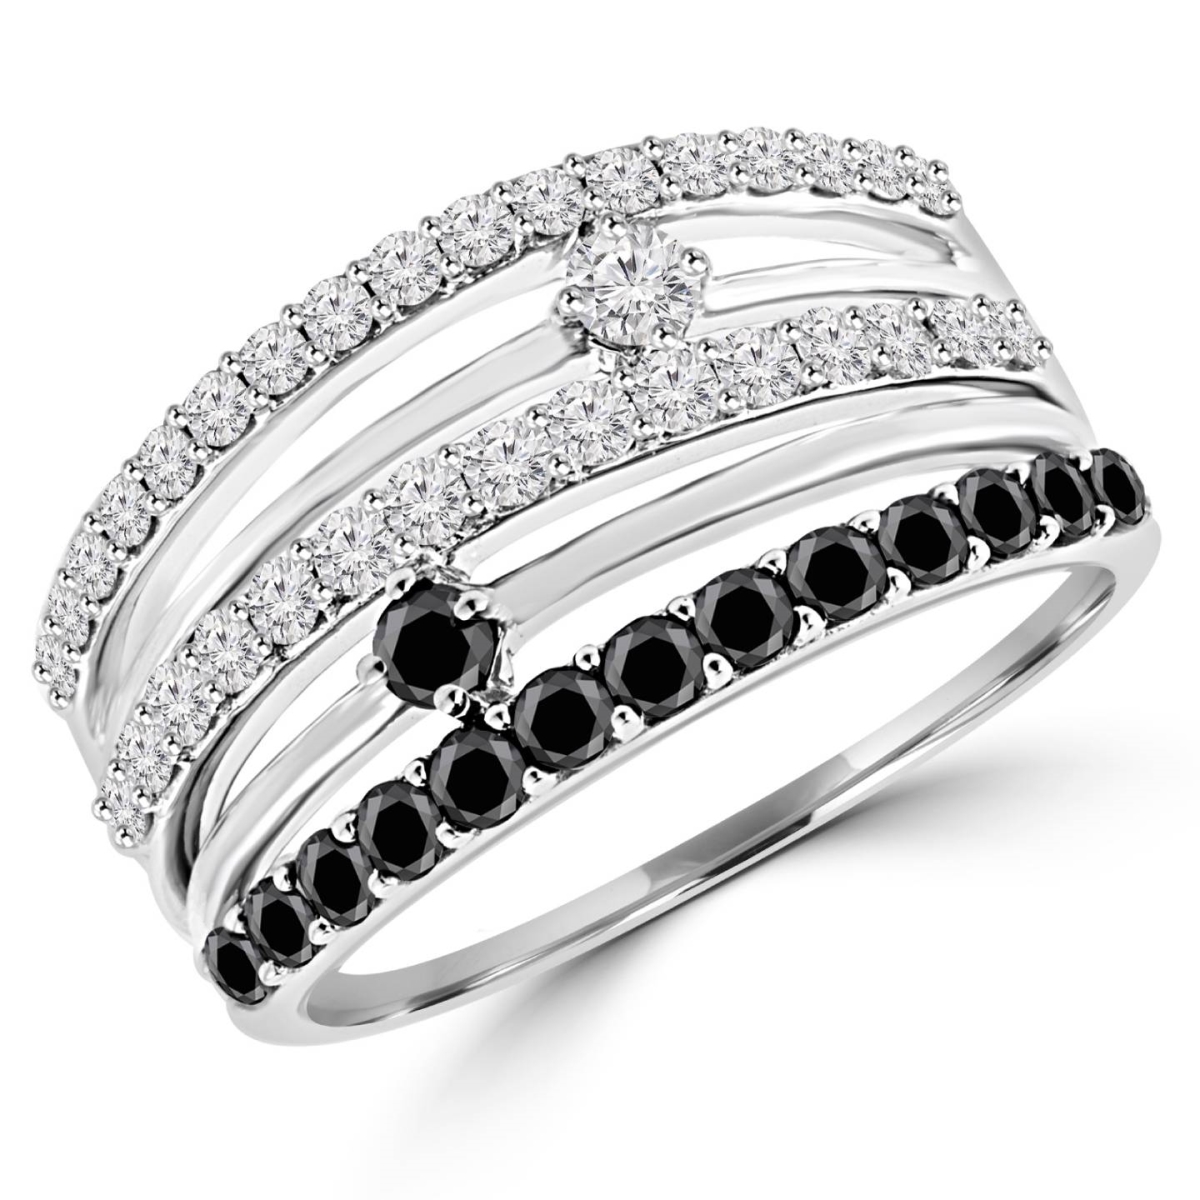 Picture of Majesty Diamonds MDR140107-8.75 0.8 CTW 5-Row Black & White Diamond Fashion Cocktail Ring in 14K White Gold - Size 8.75